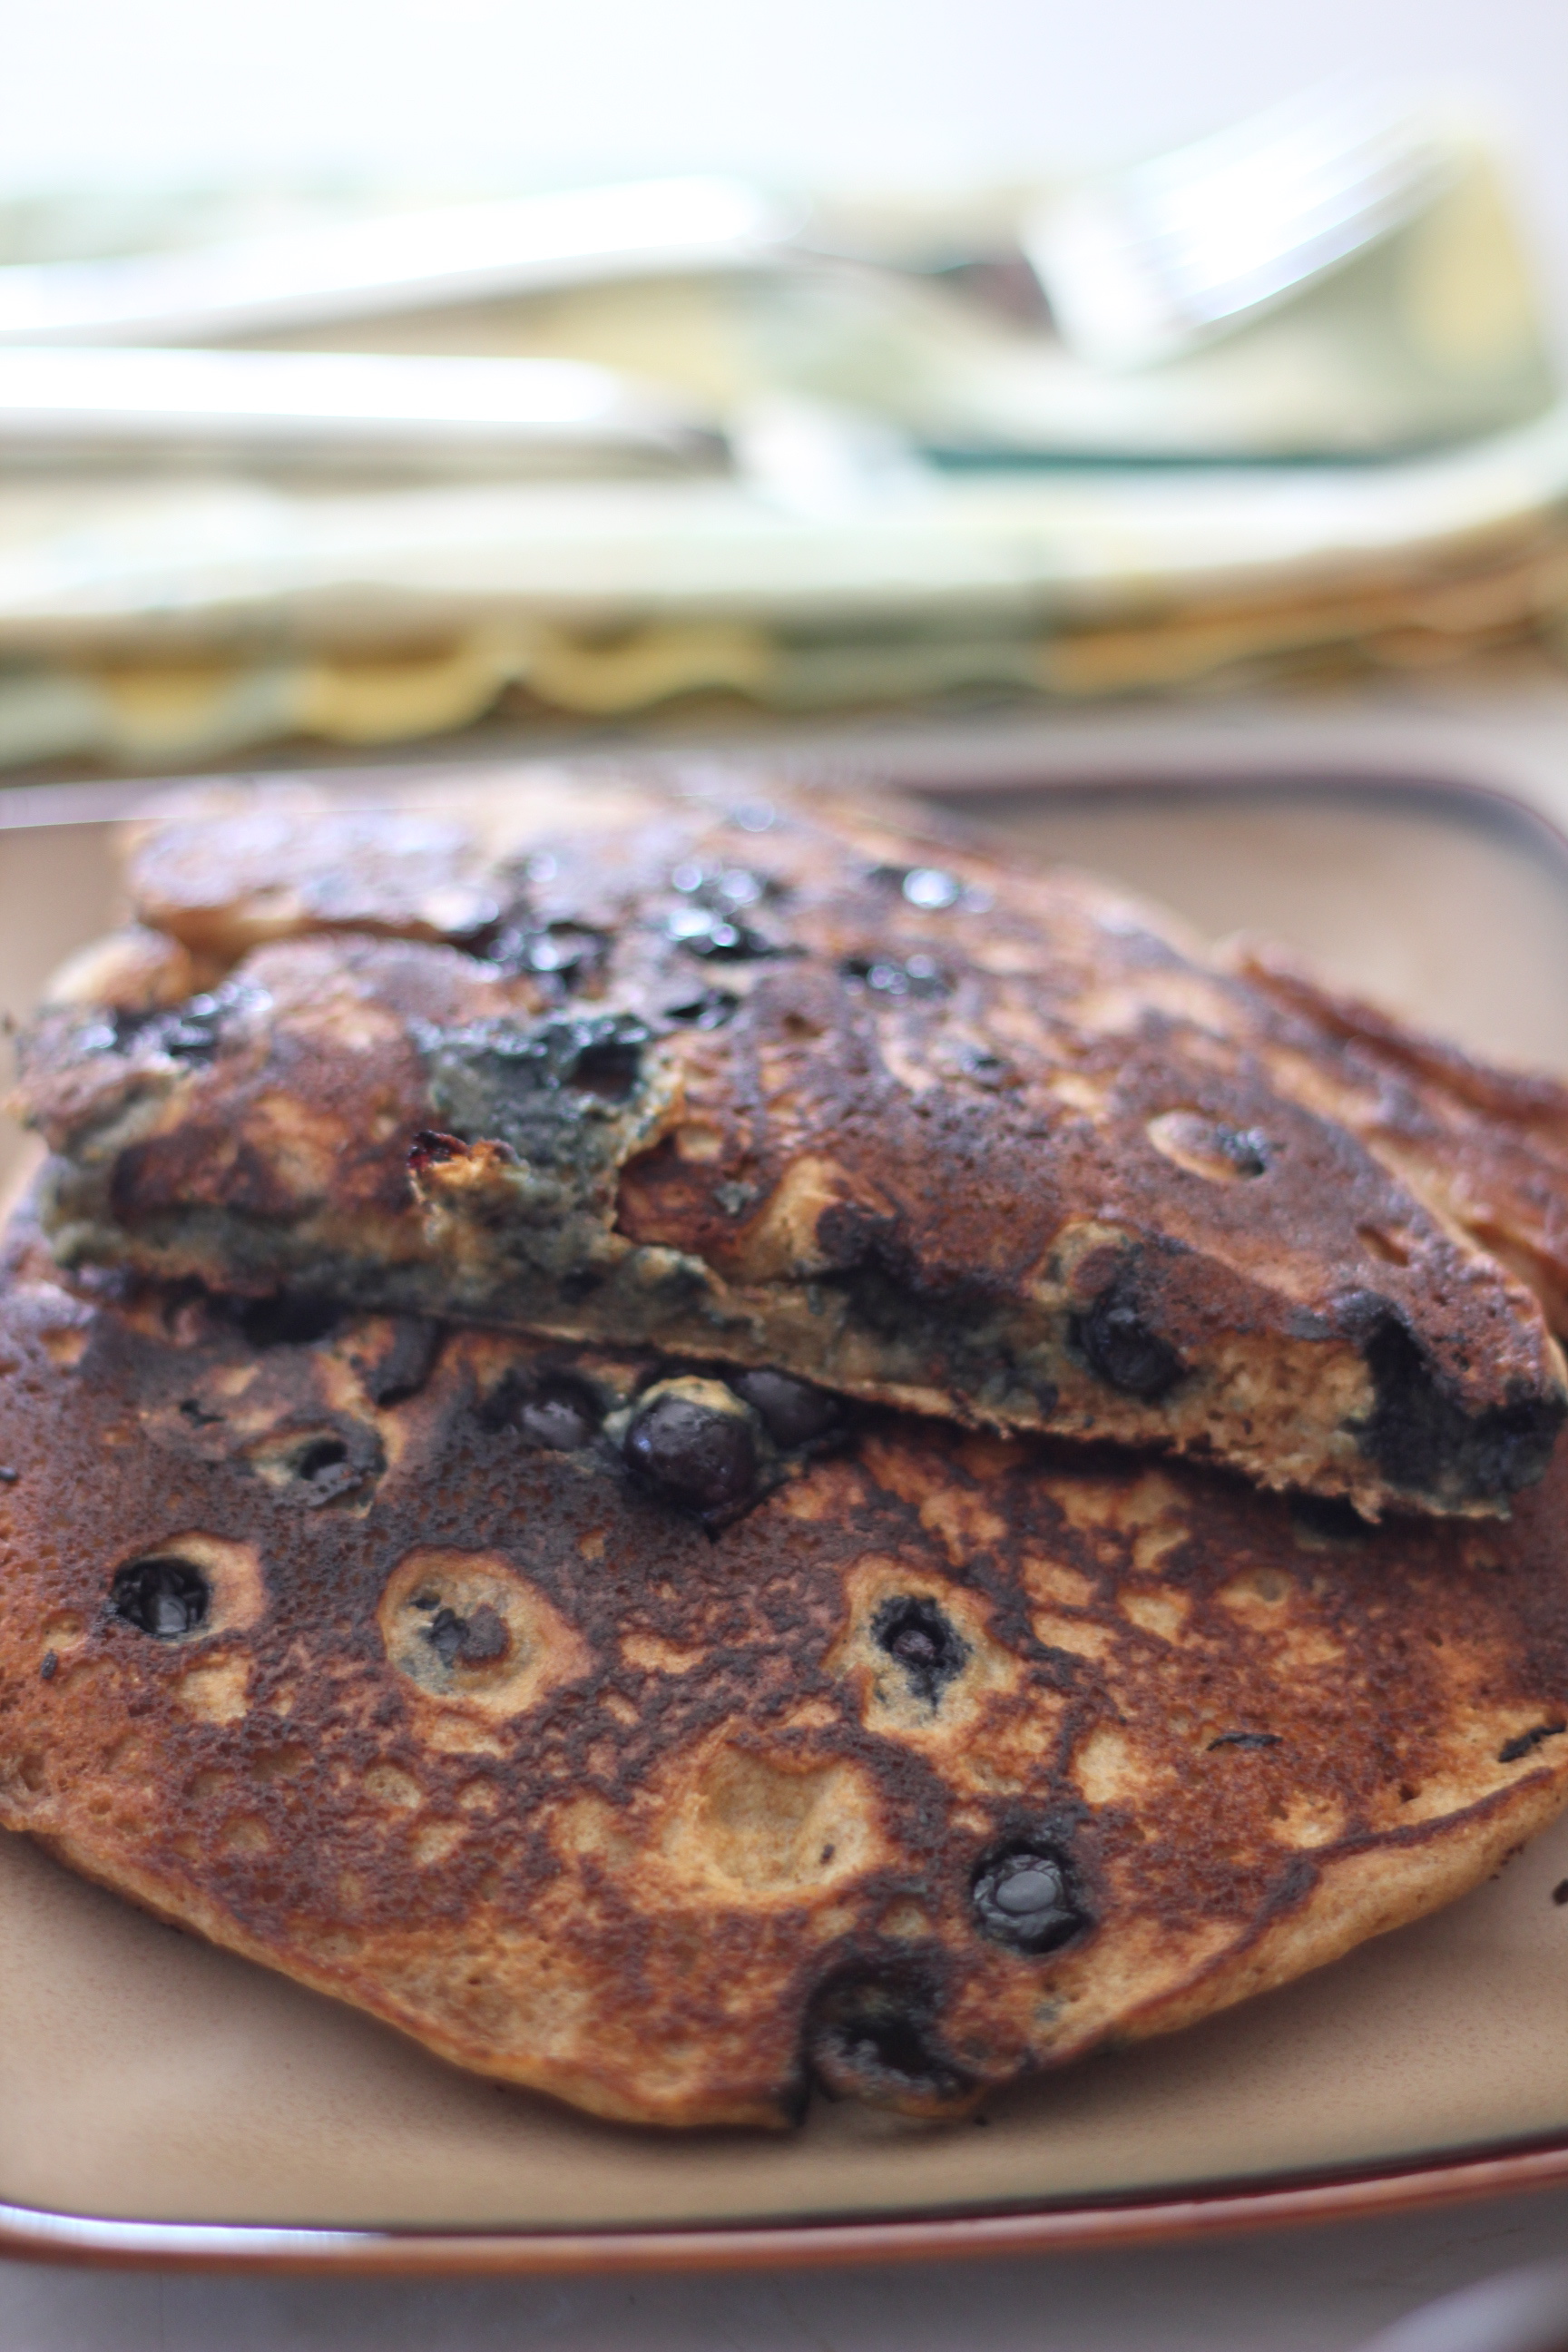 Not-Buttermilk Pancakes with Blueberries